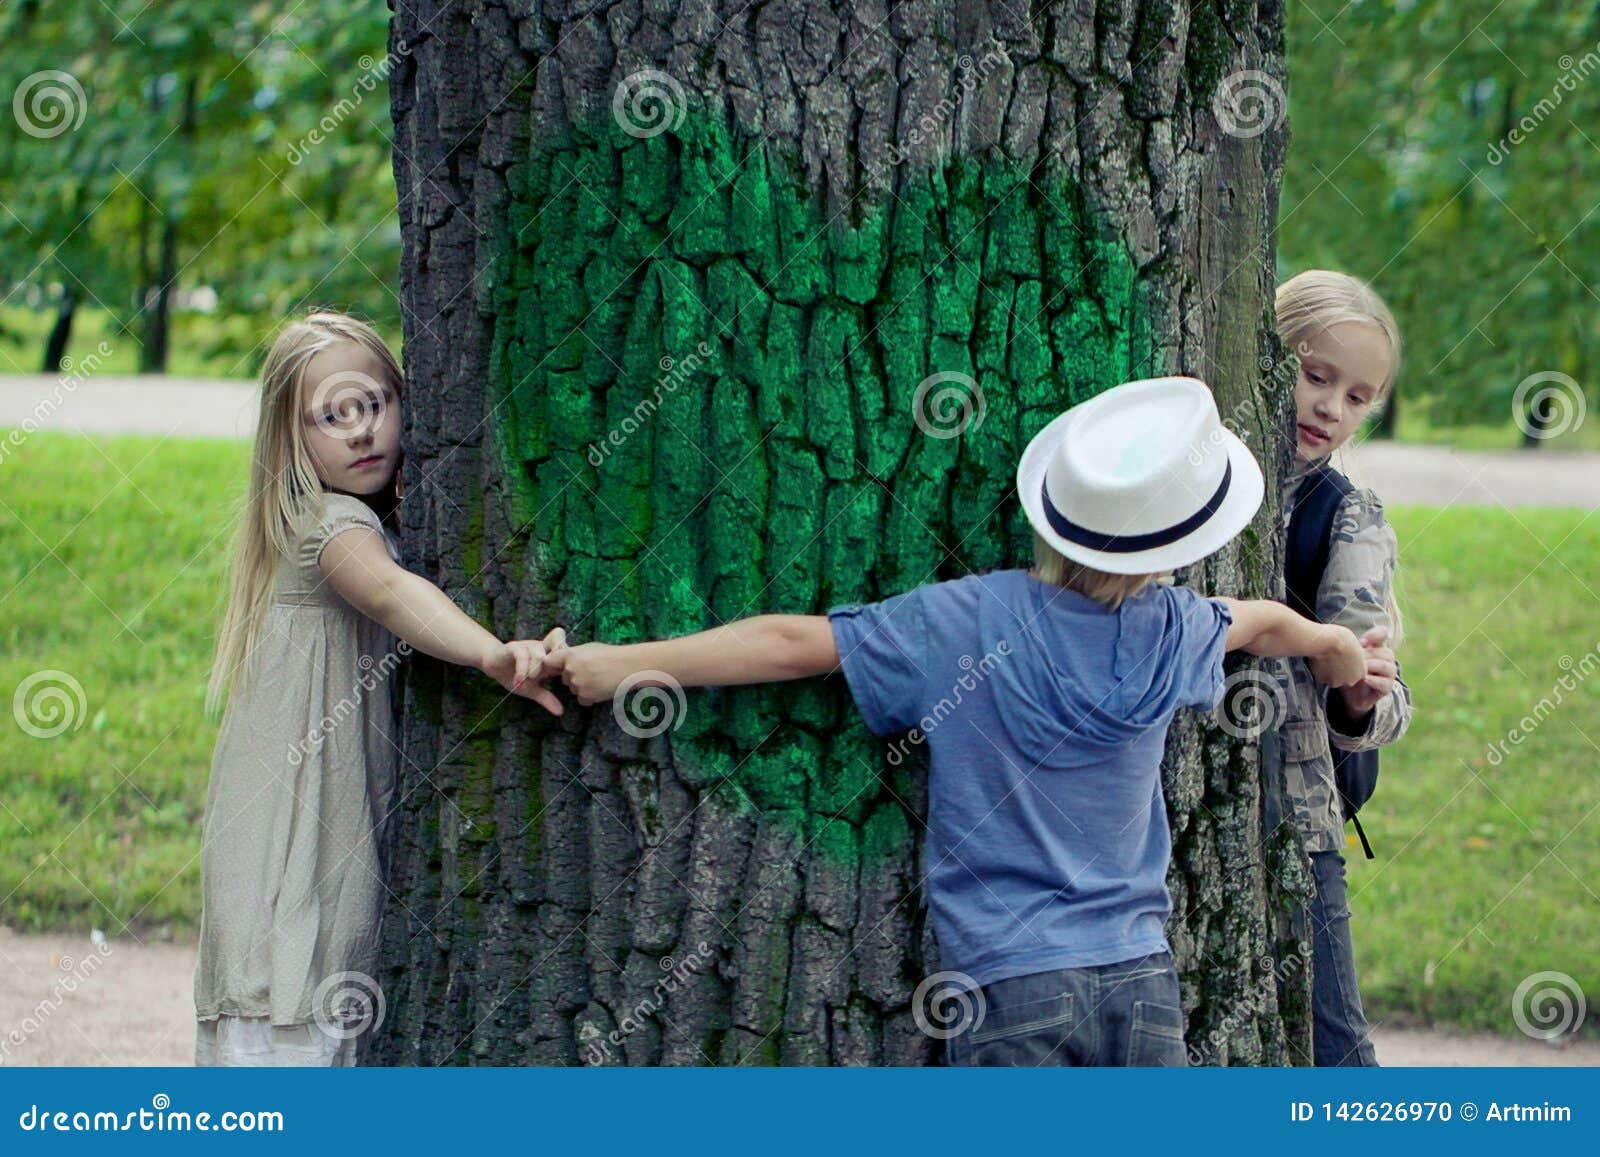 Children Embracing Tree. Environmental Protection Outdoor Nature